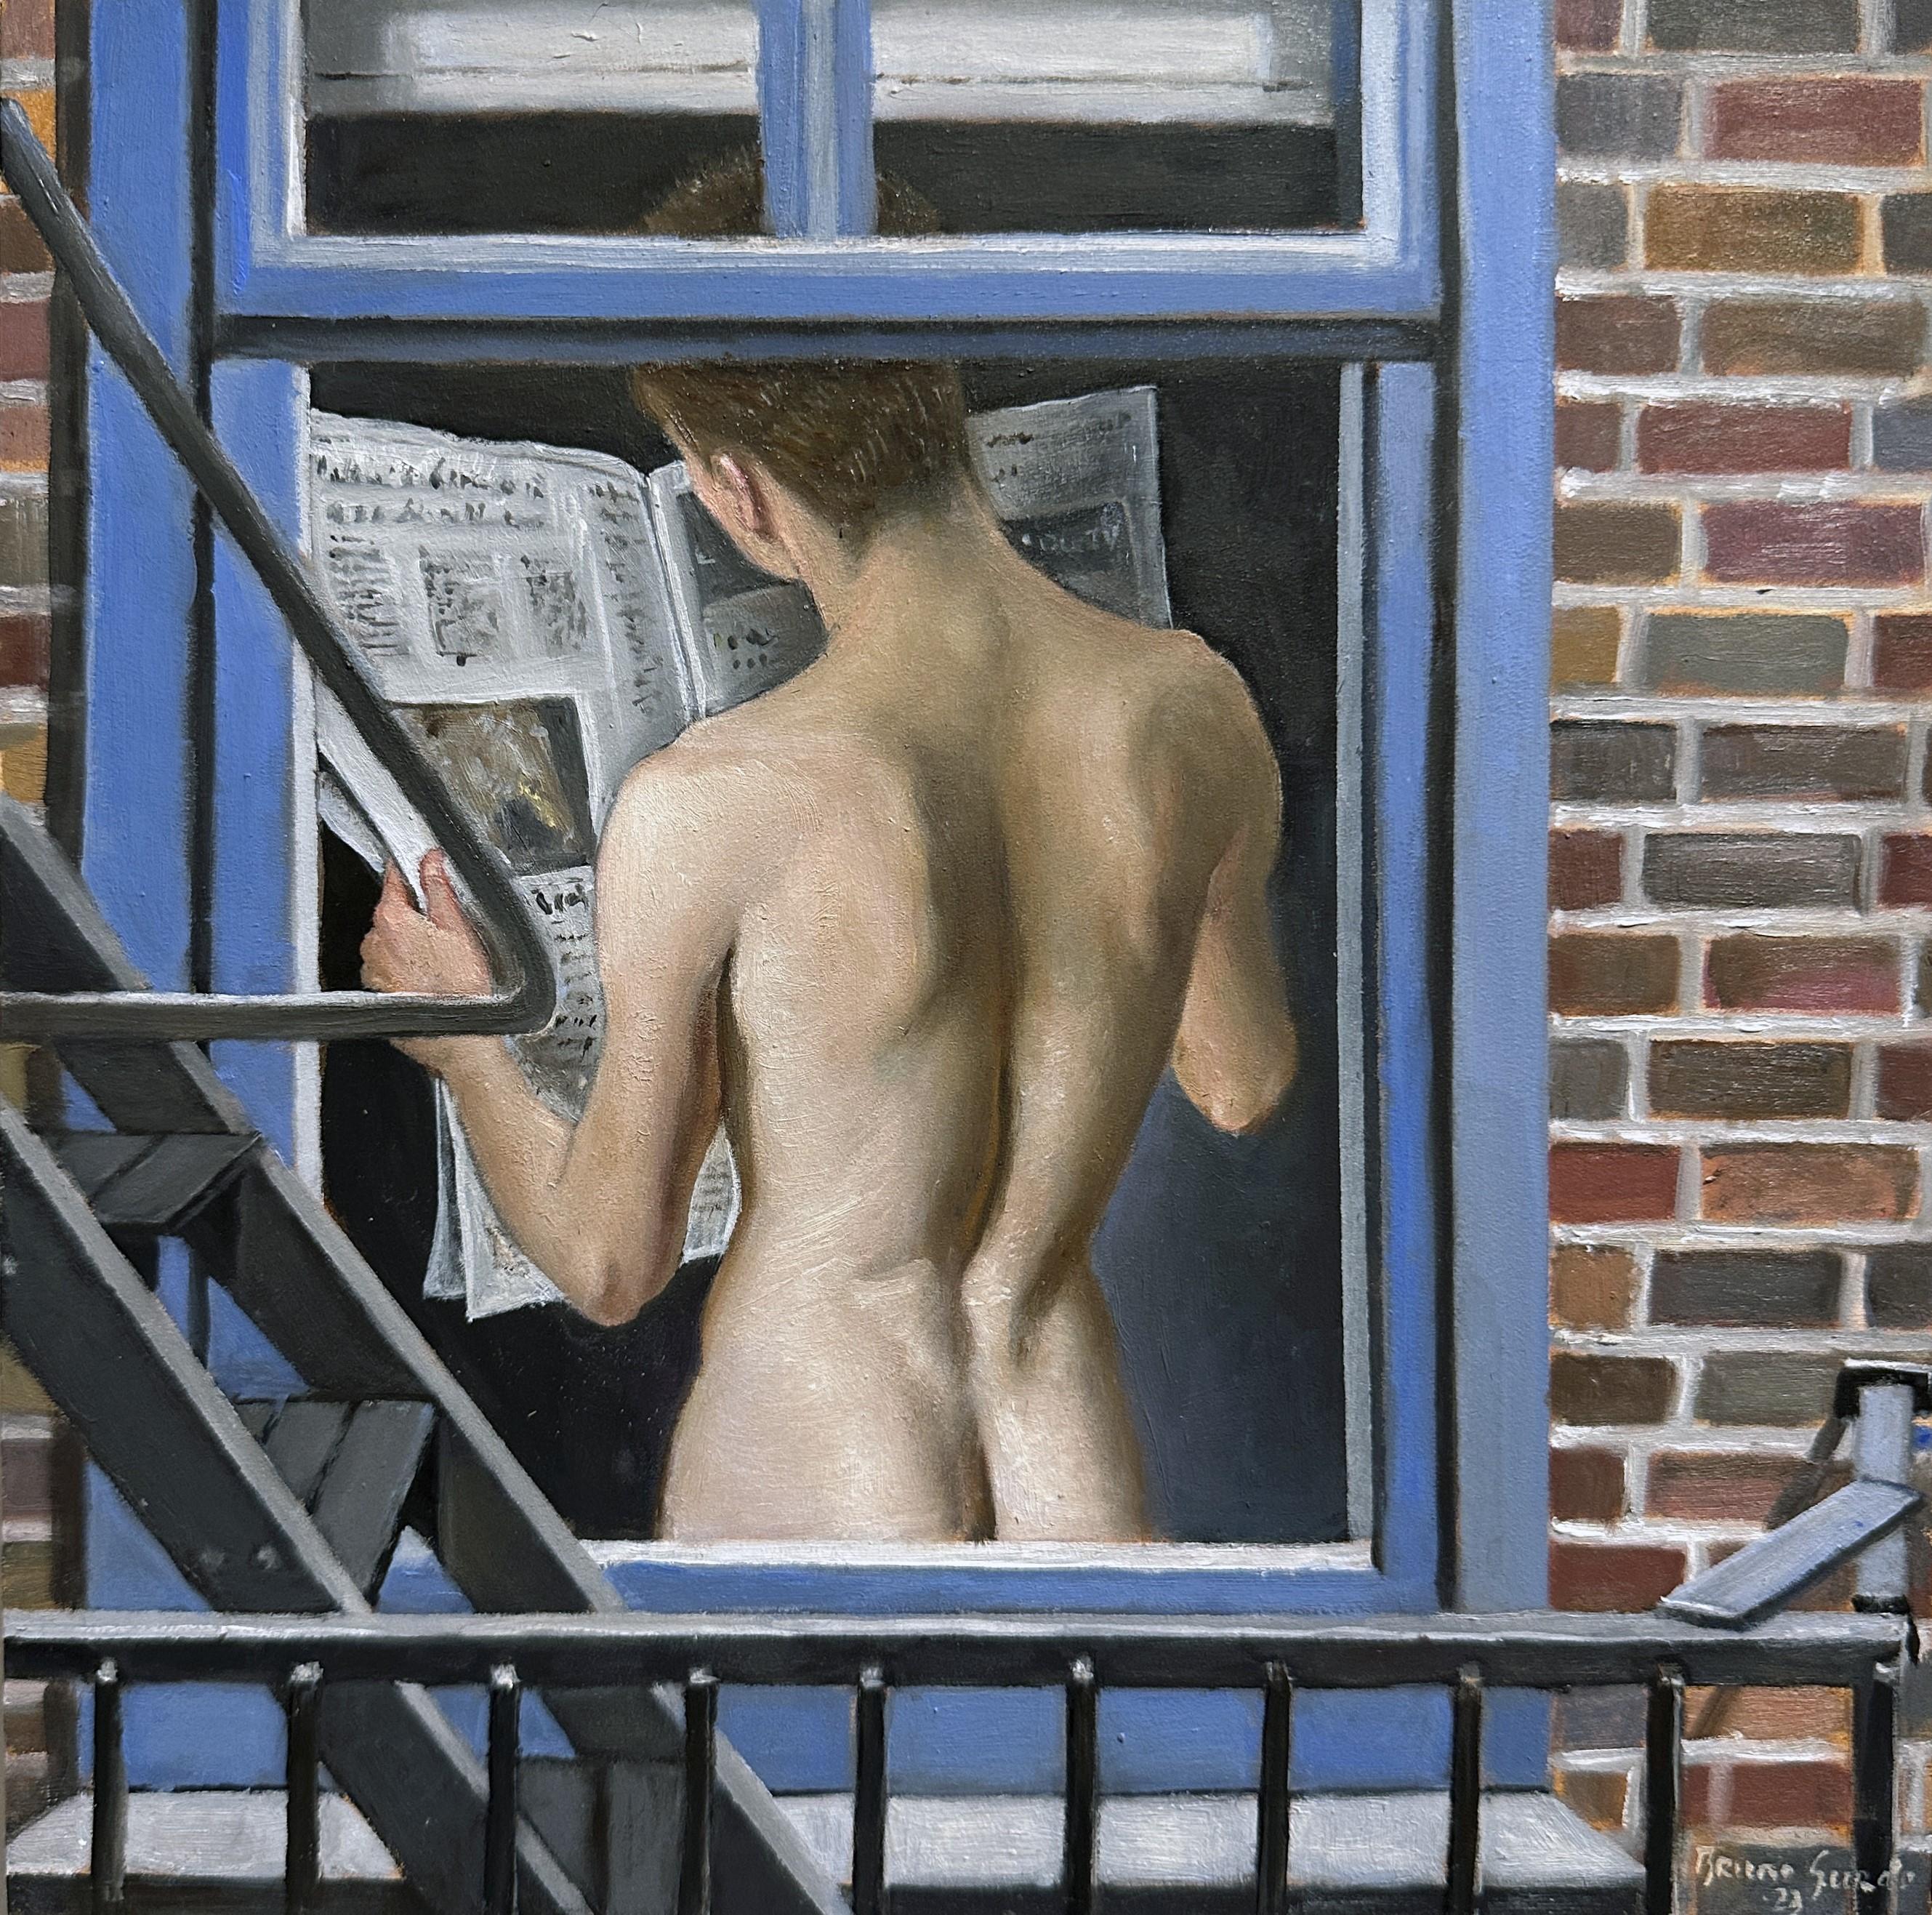 Bruno Surdo - Morning News - Voyeuristic View of Nude Male Torso Through  the Fire Escape For Sale at 1stDibs